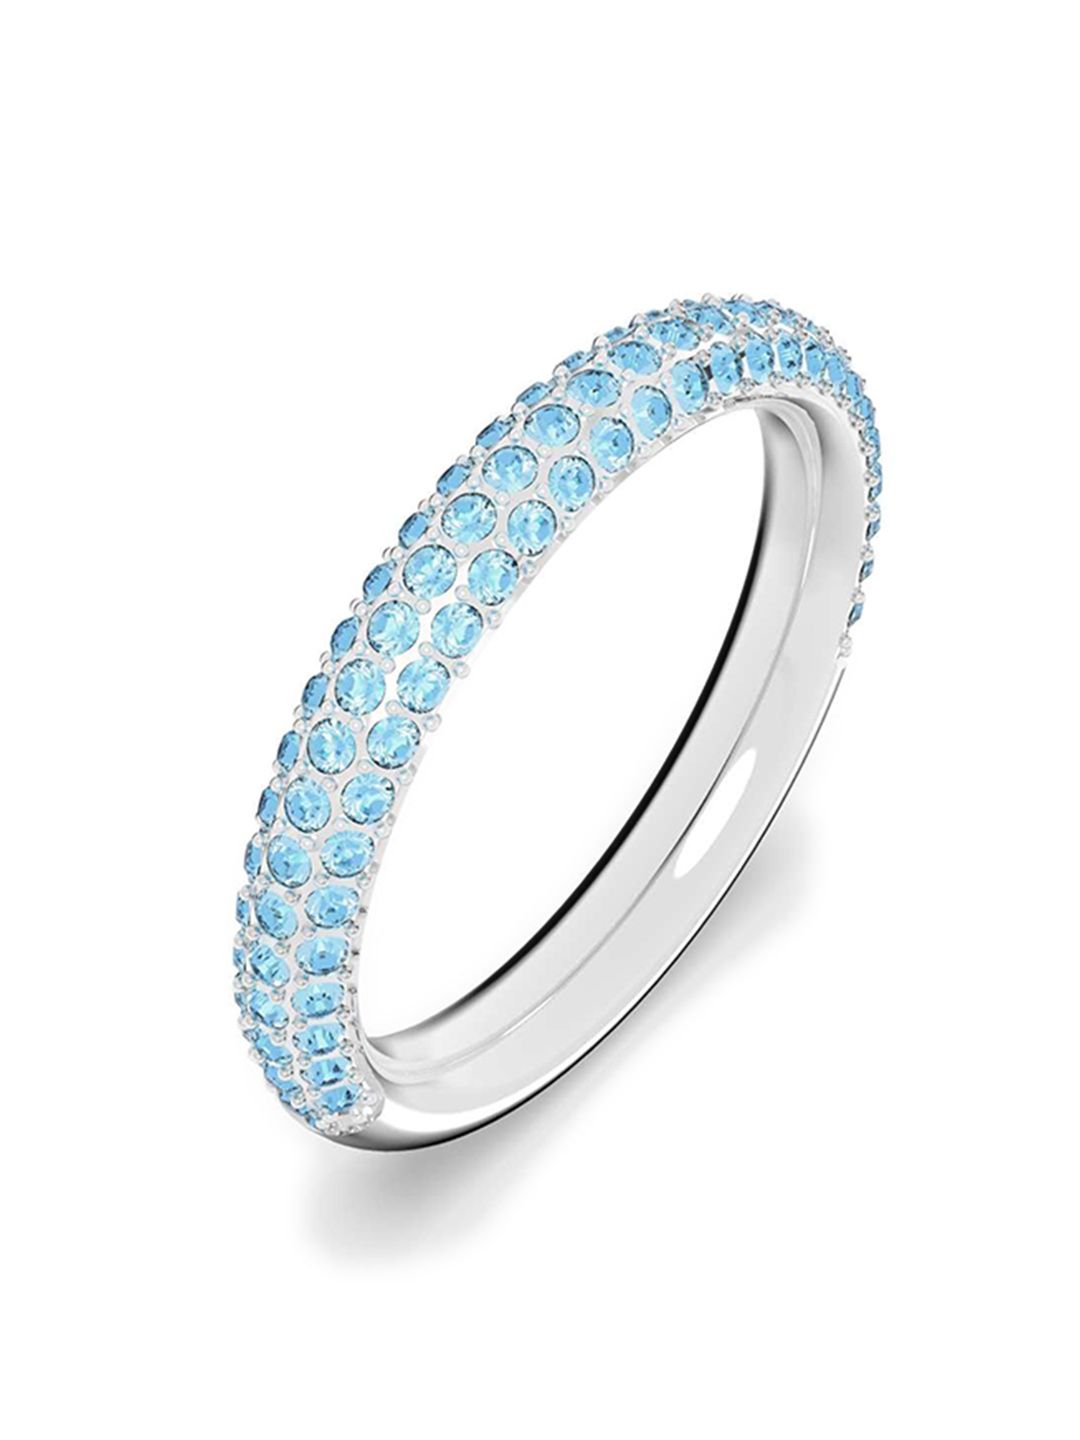 SWAROVSKI Rhodium-Plated Blue Crystal-Studded Finger Ring Price in India